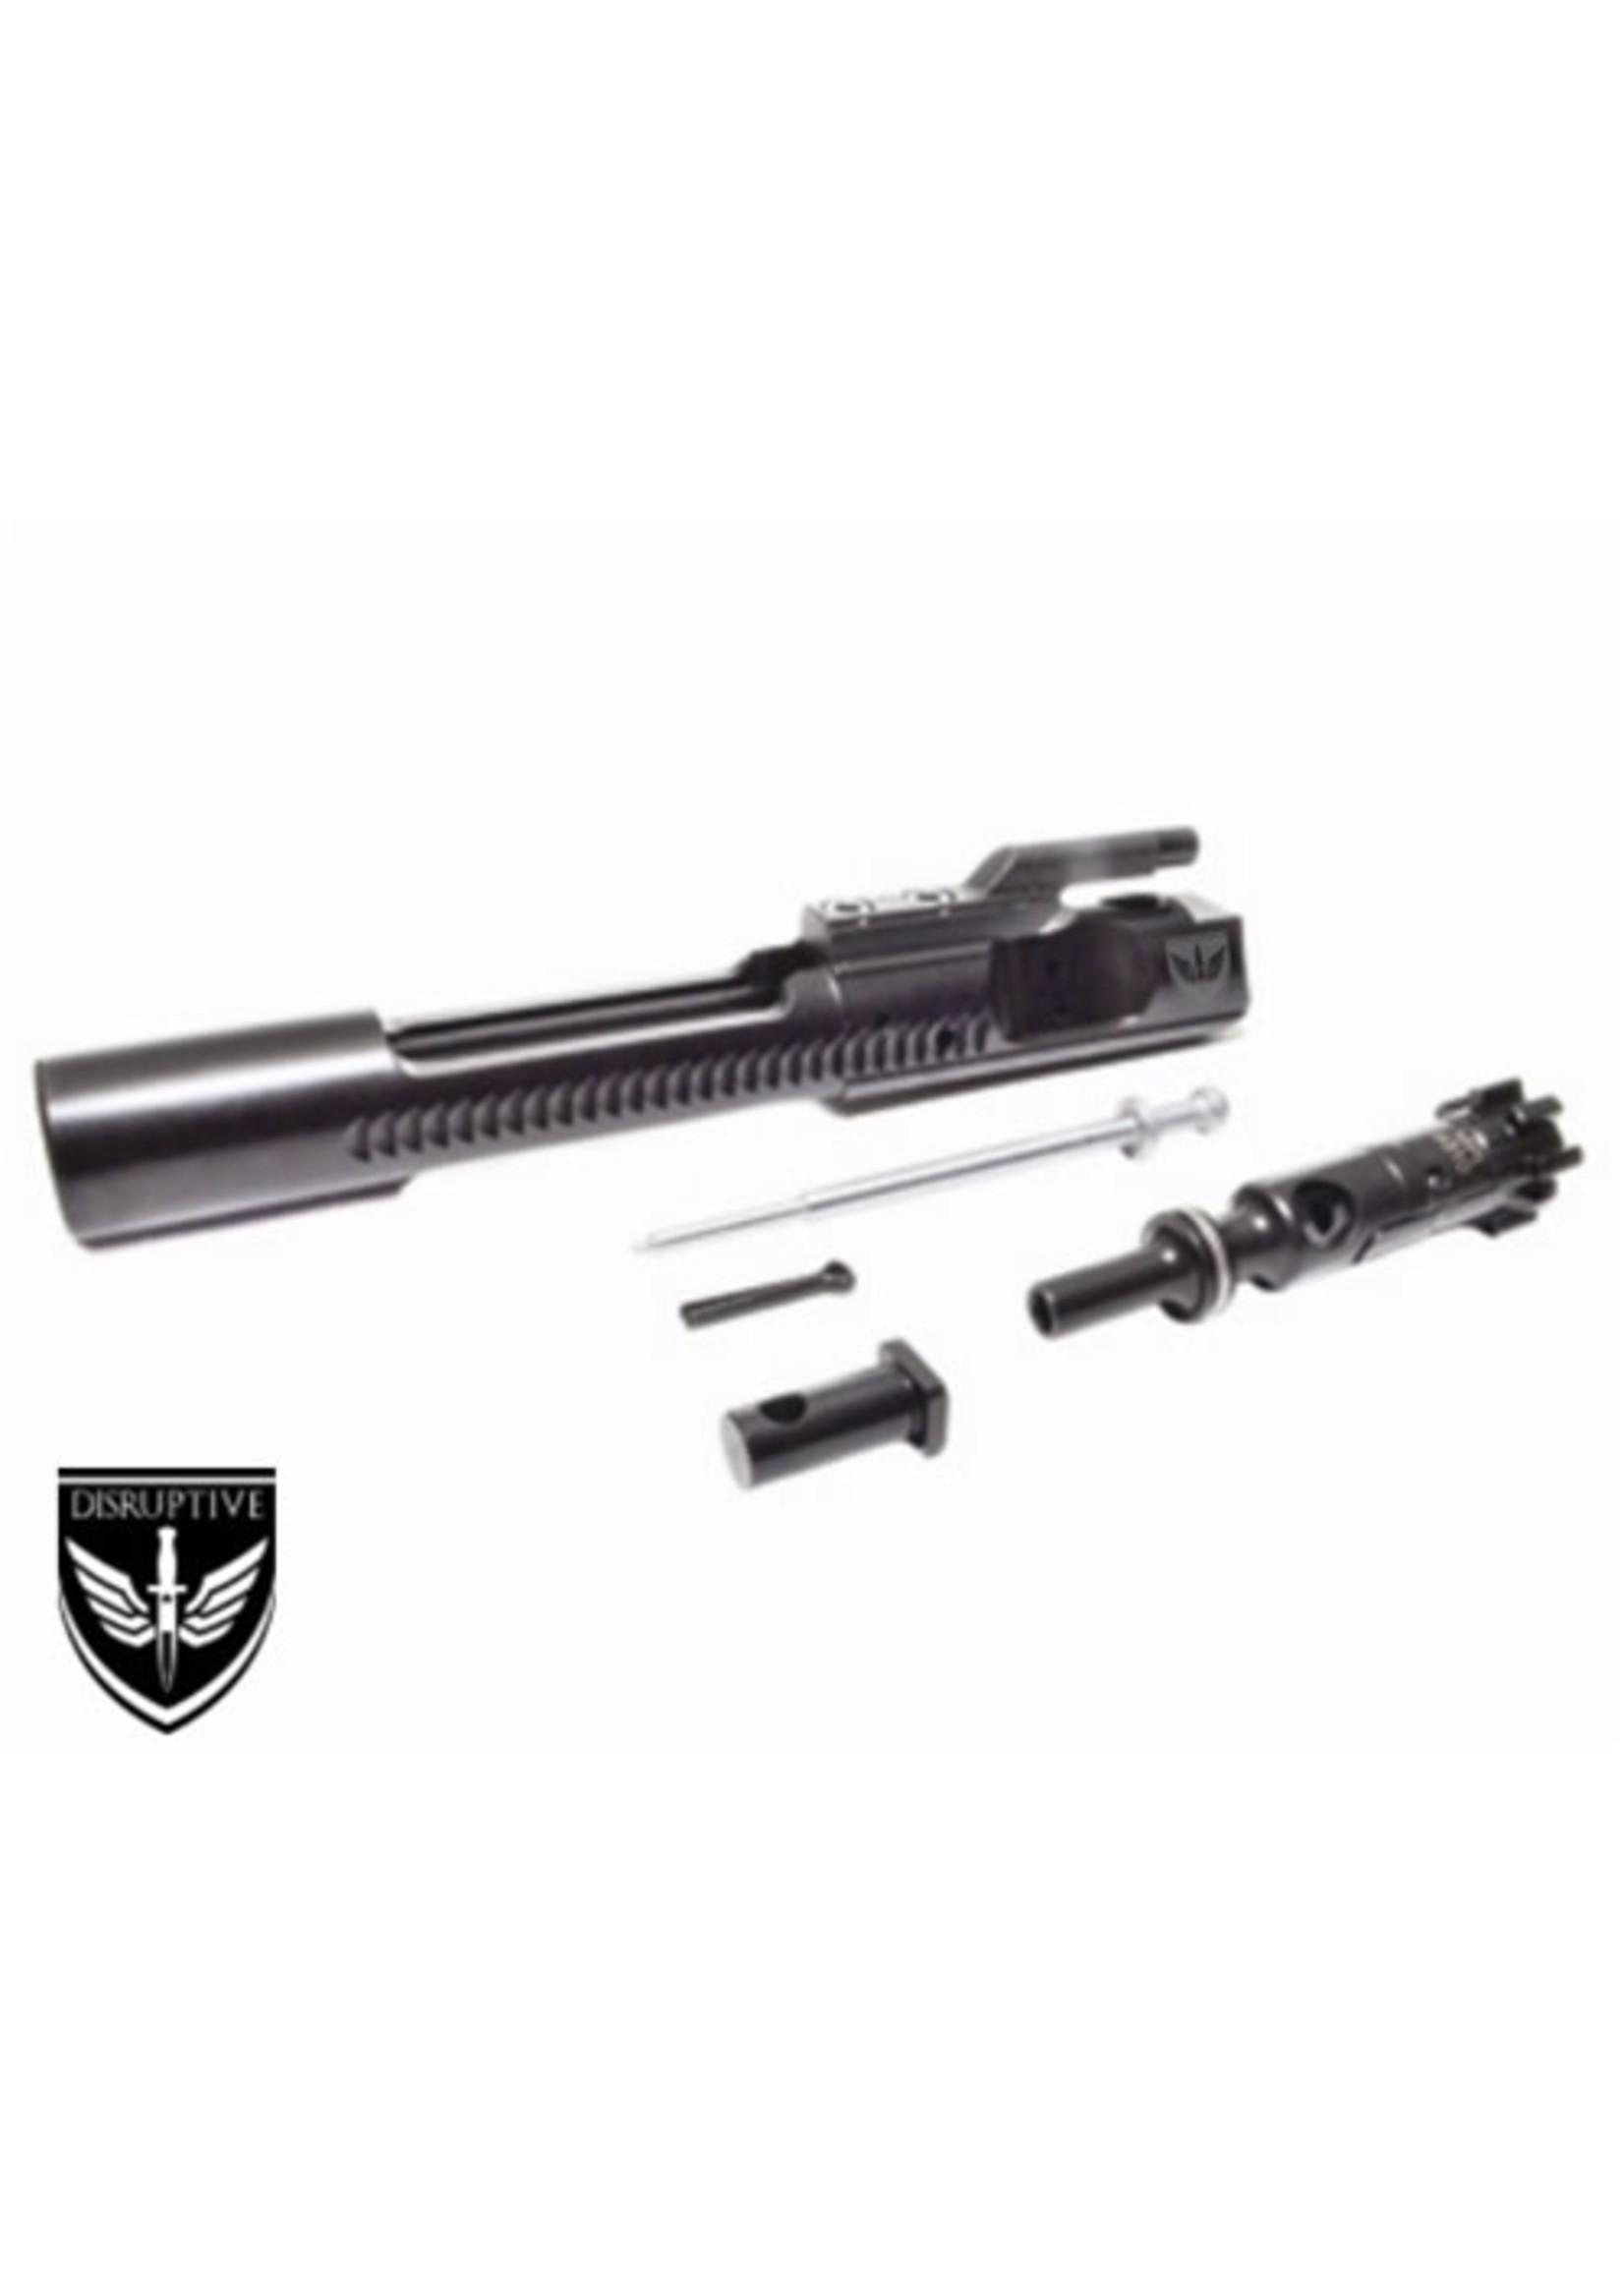 Disruptive Tactical DT15 BCG BOLT W/5.56 Chrome lined Billet Extractor